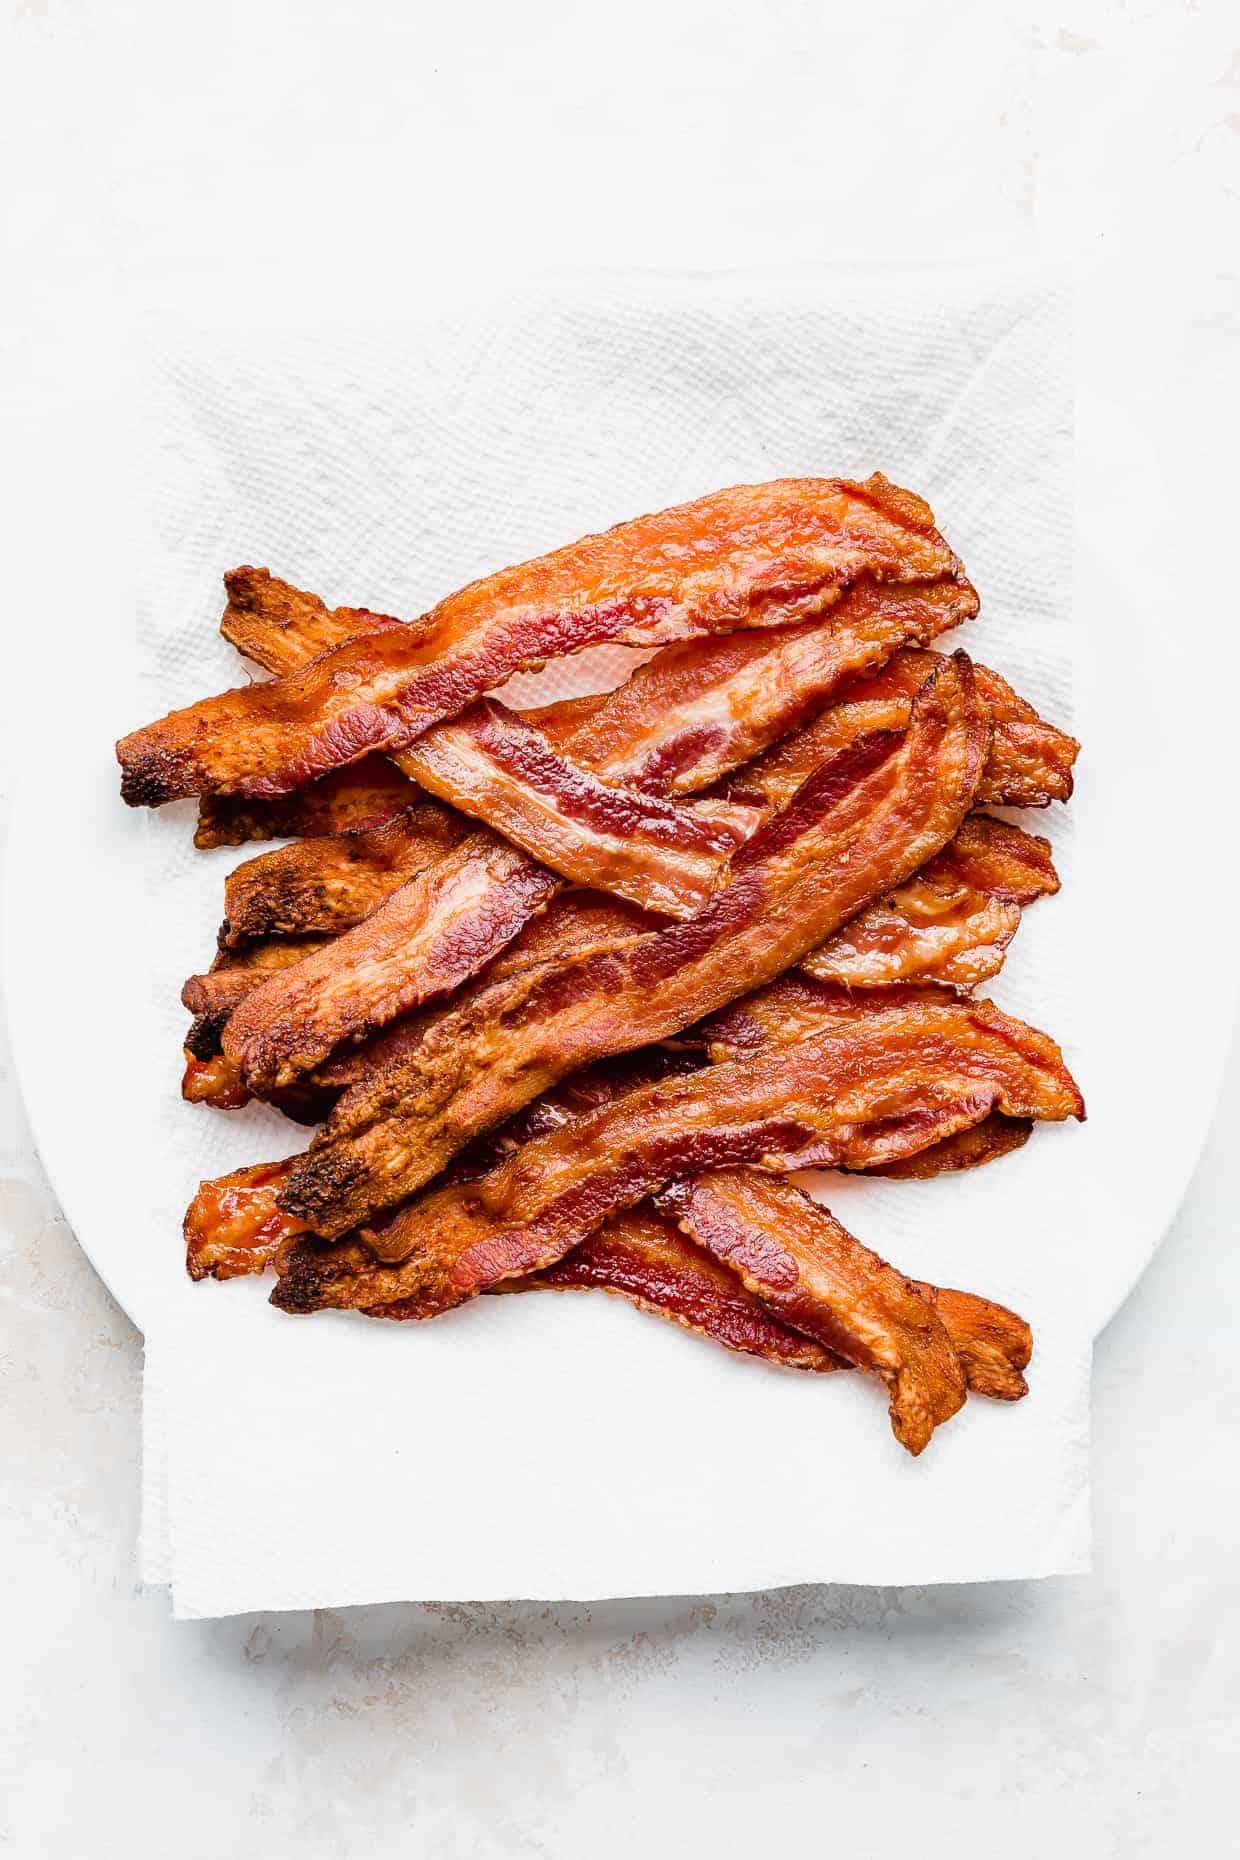 Crispy cooked bacon on a white paper towel lined plate.